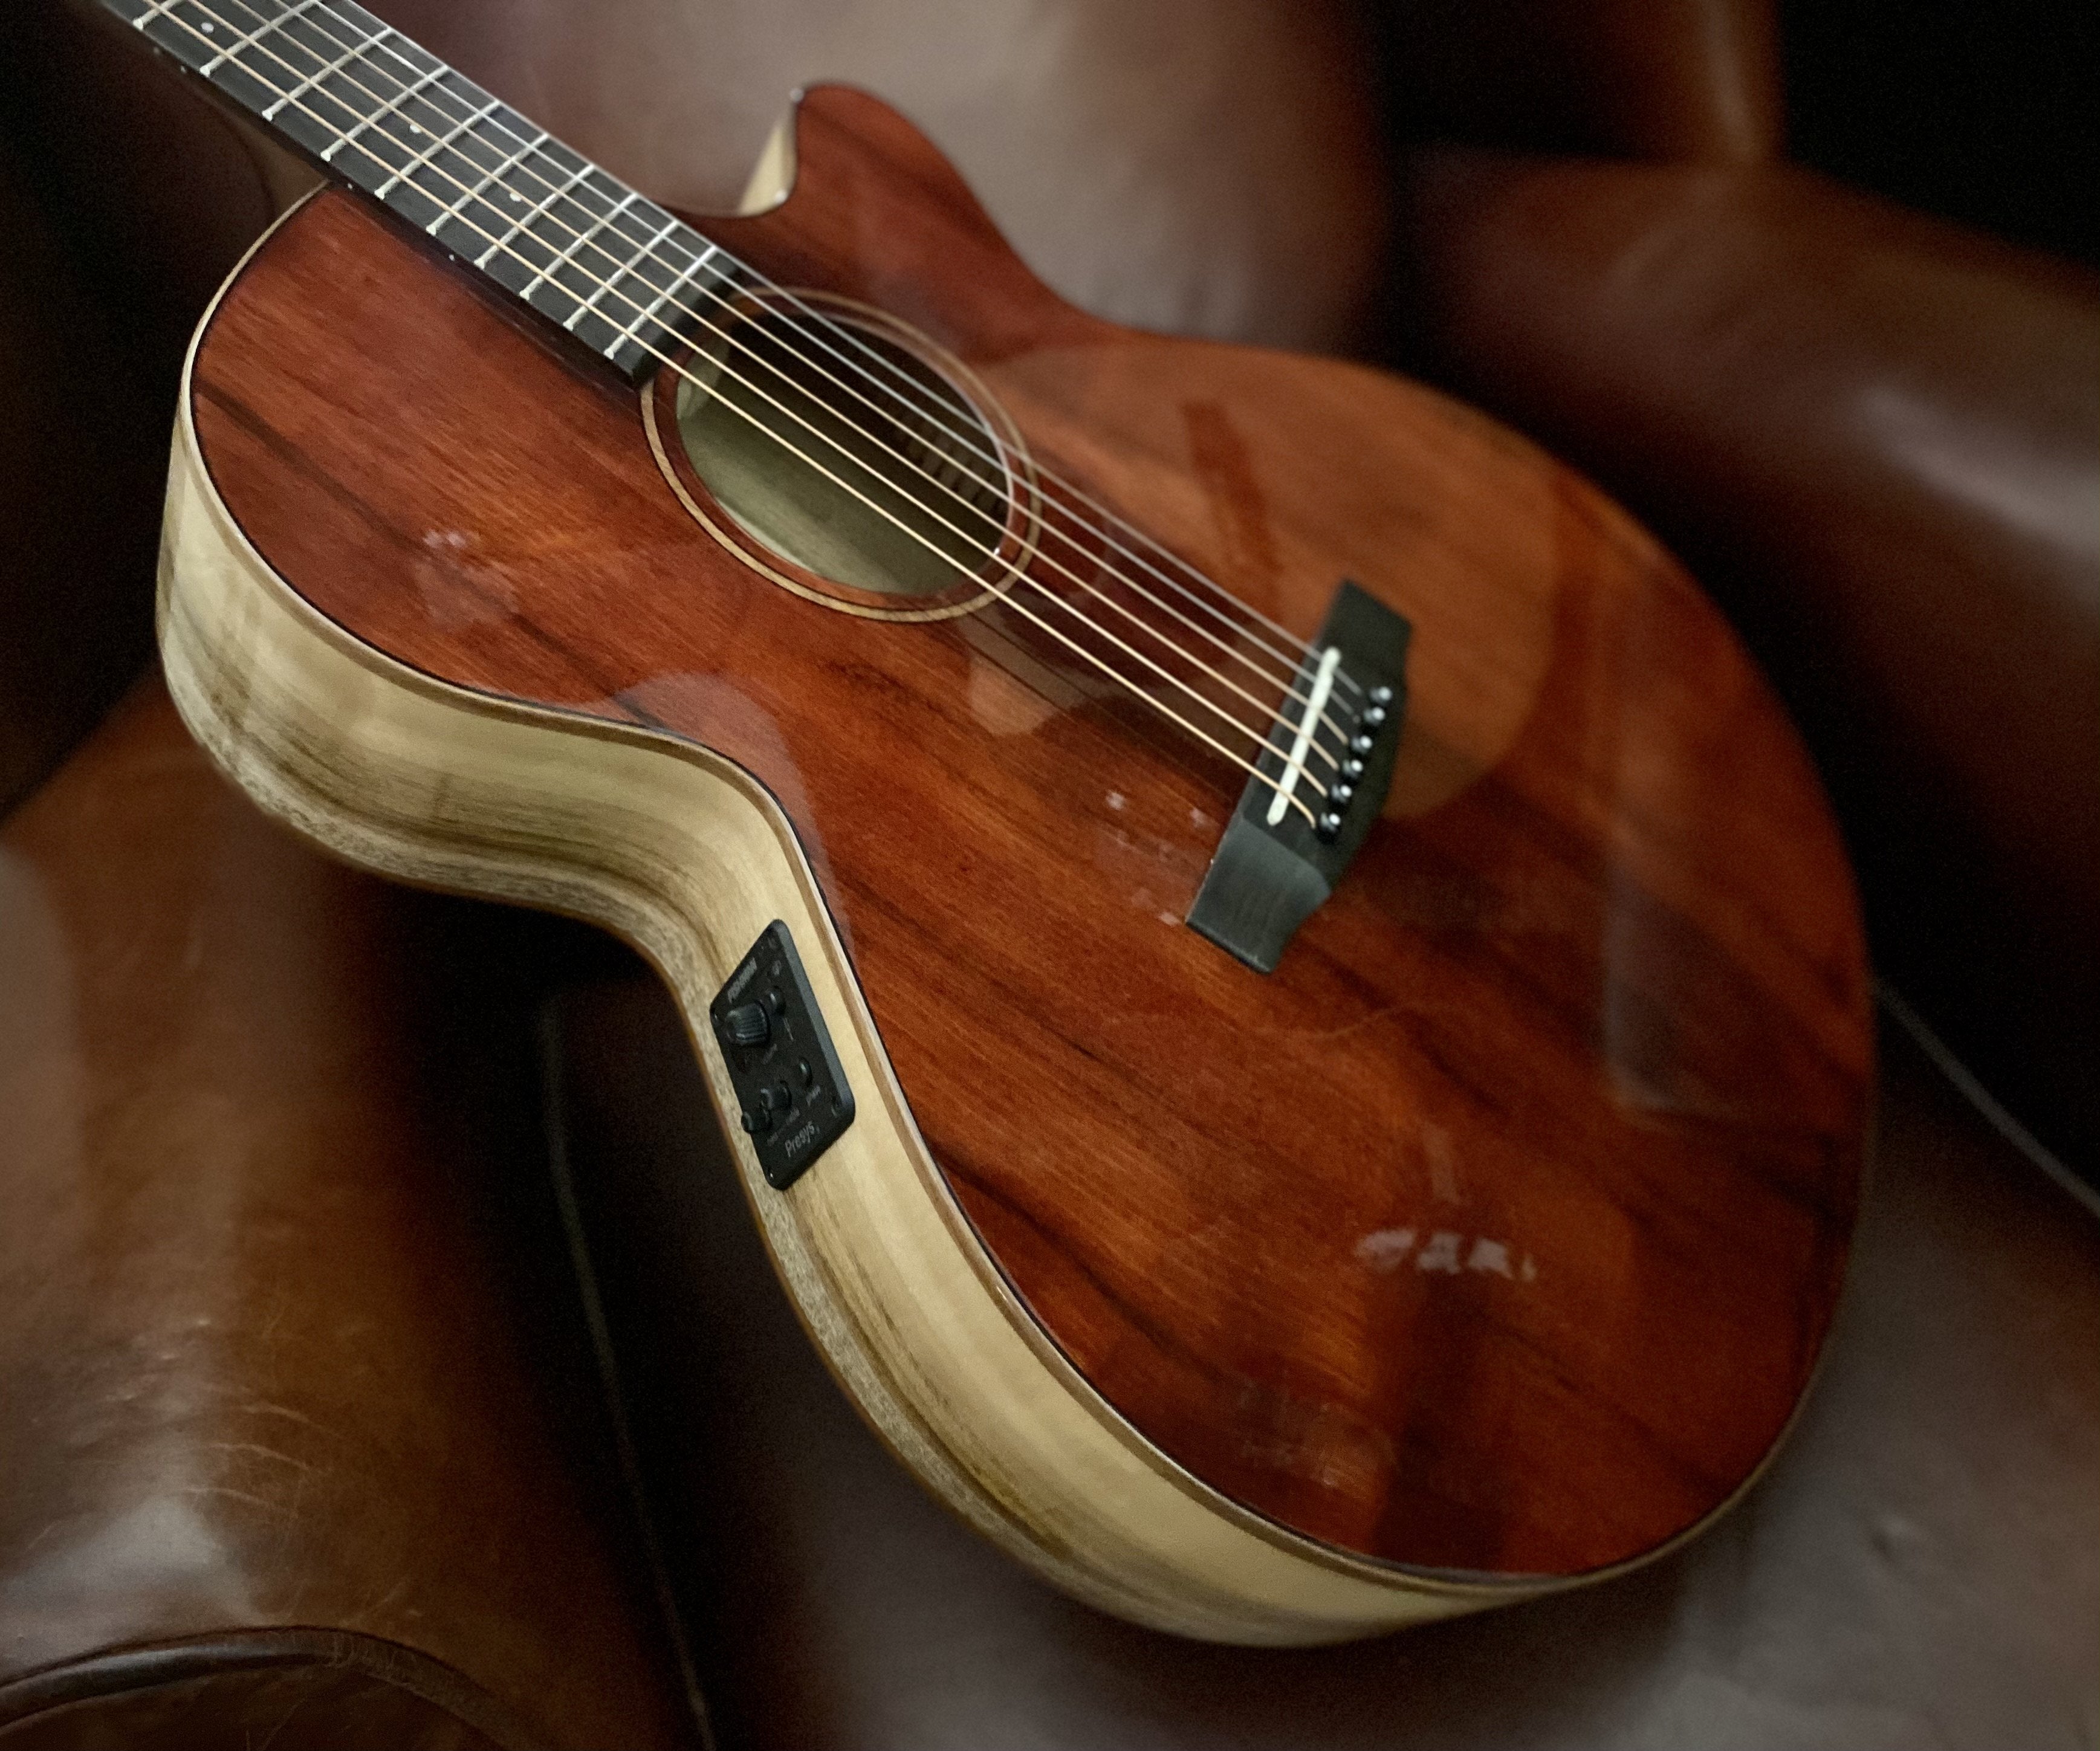 Cort SFX All Myrtlewood Brown Gloss, Electro Acoustic Guitar for sale at Richards Guitars.